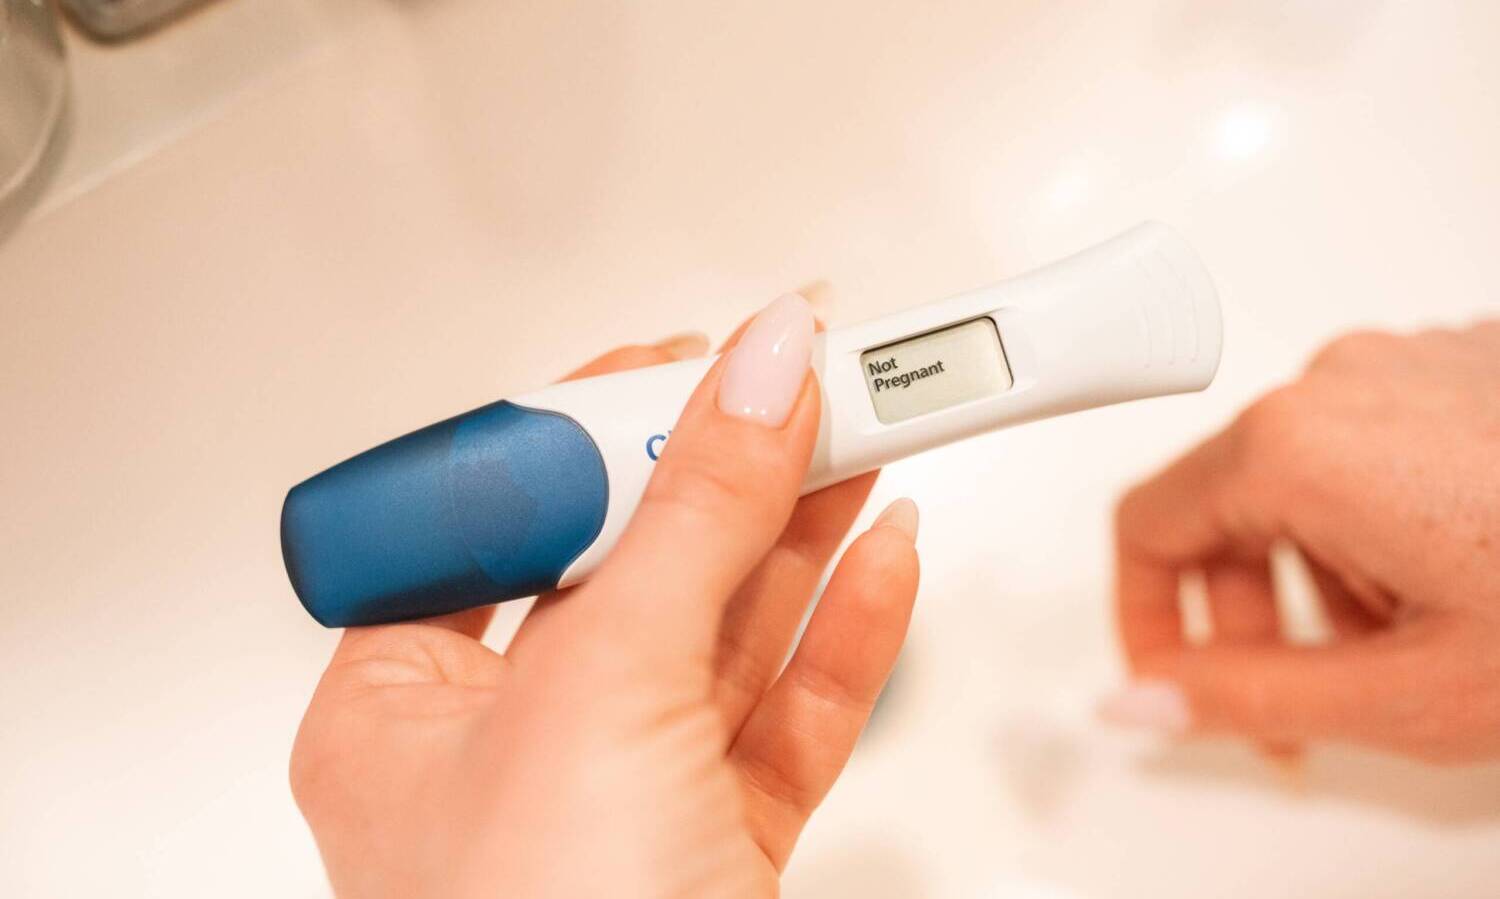 Alabama, How Could You? Senate Approves Forcing Women To Take Pregnancy Test To Obtain Weed